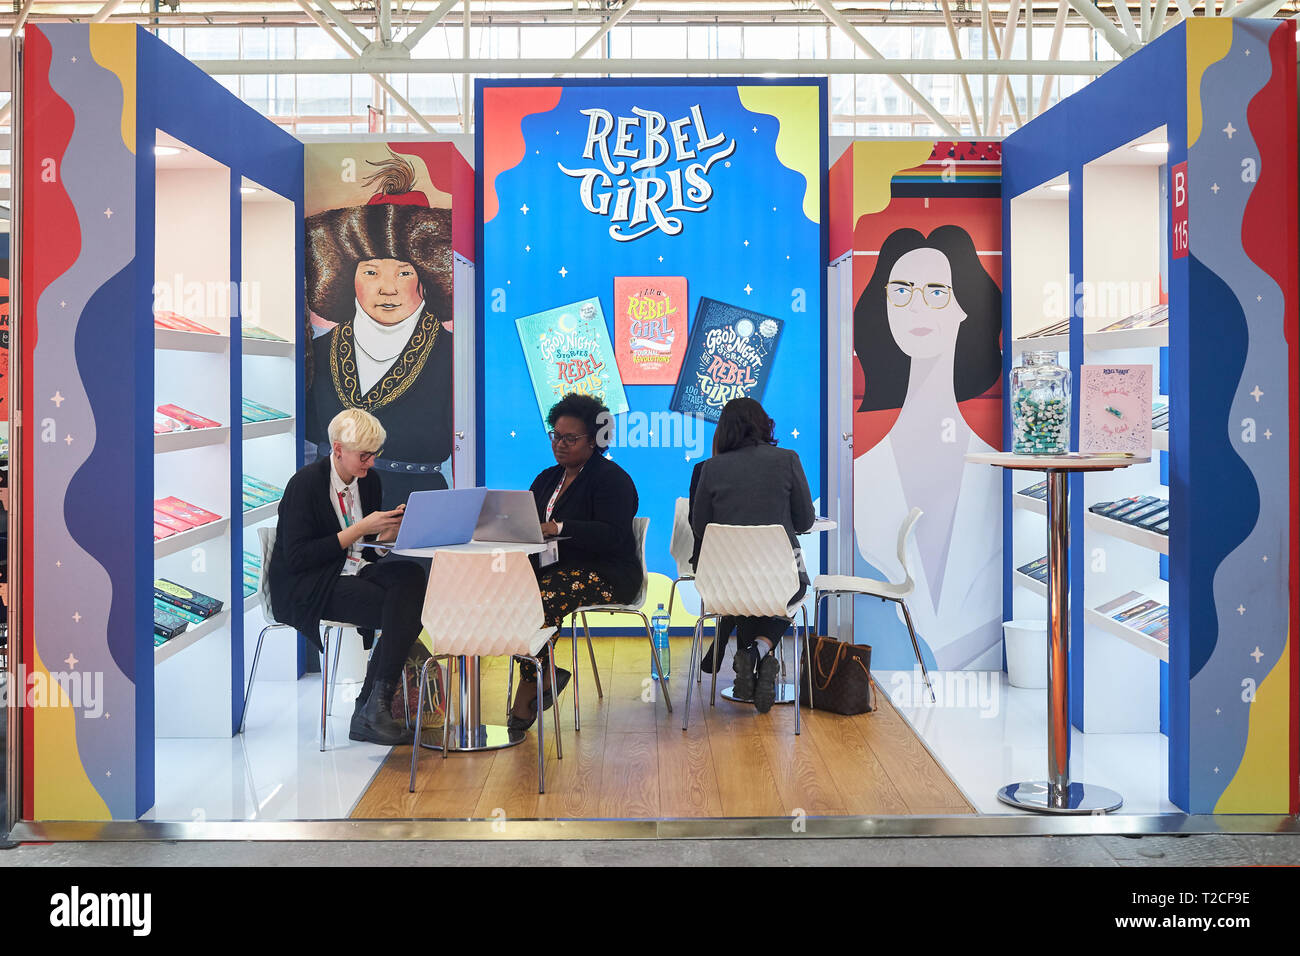 Bologna, ITALY. 1 April, 2019. Views from Bologna Children's Book Fair Opening Day at Fiera District in Bologna, Italy. Credit:  Massimiliano Donati/Awakening/Alamy Live News Stock Photo